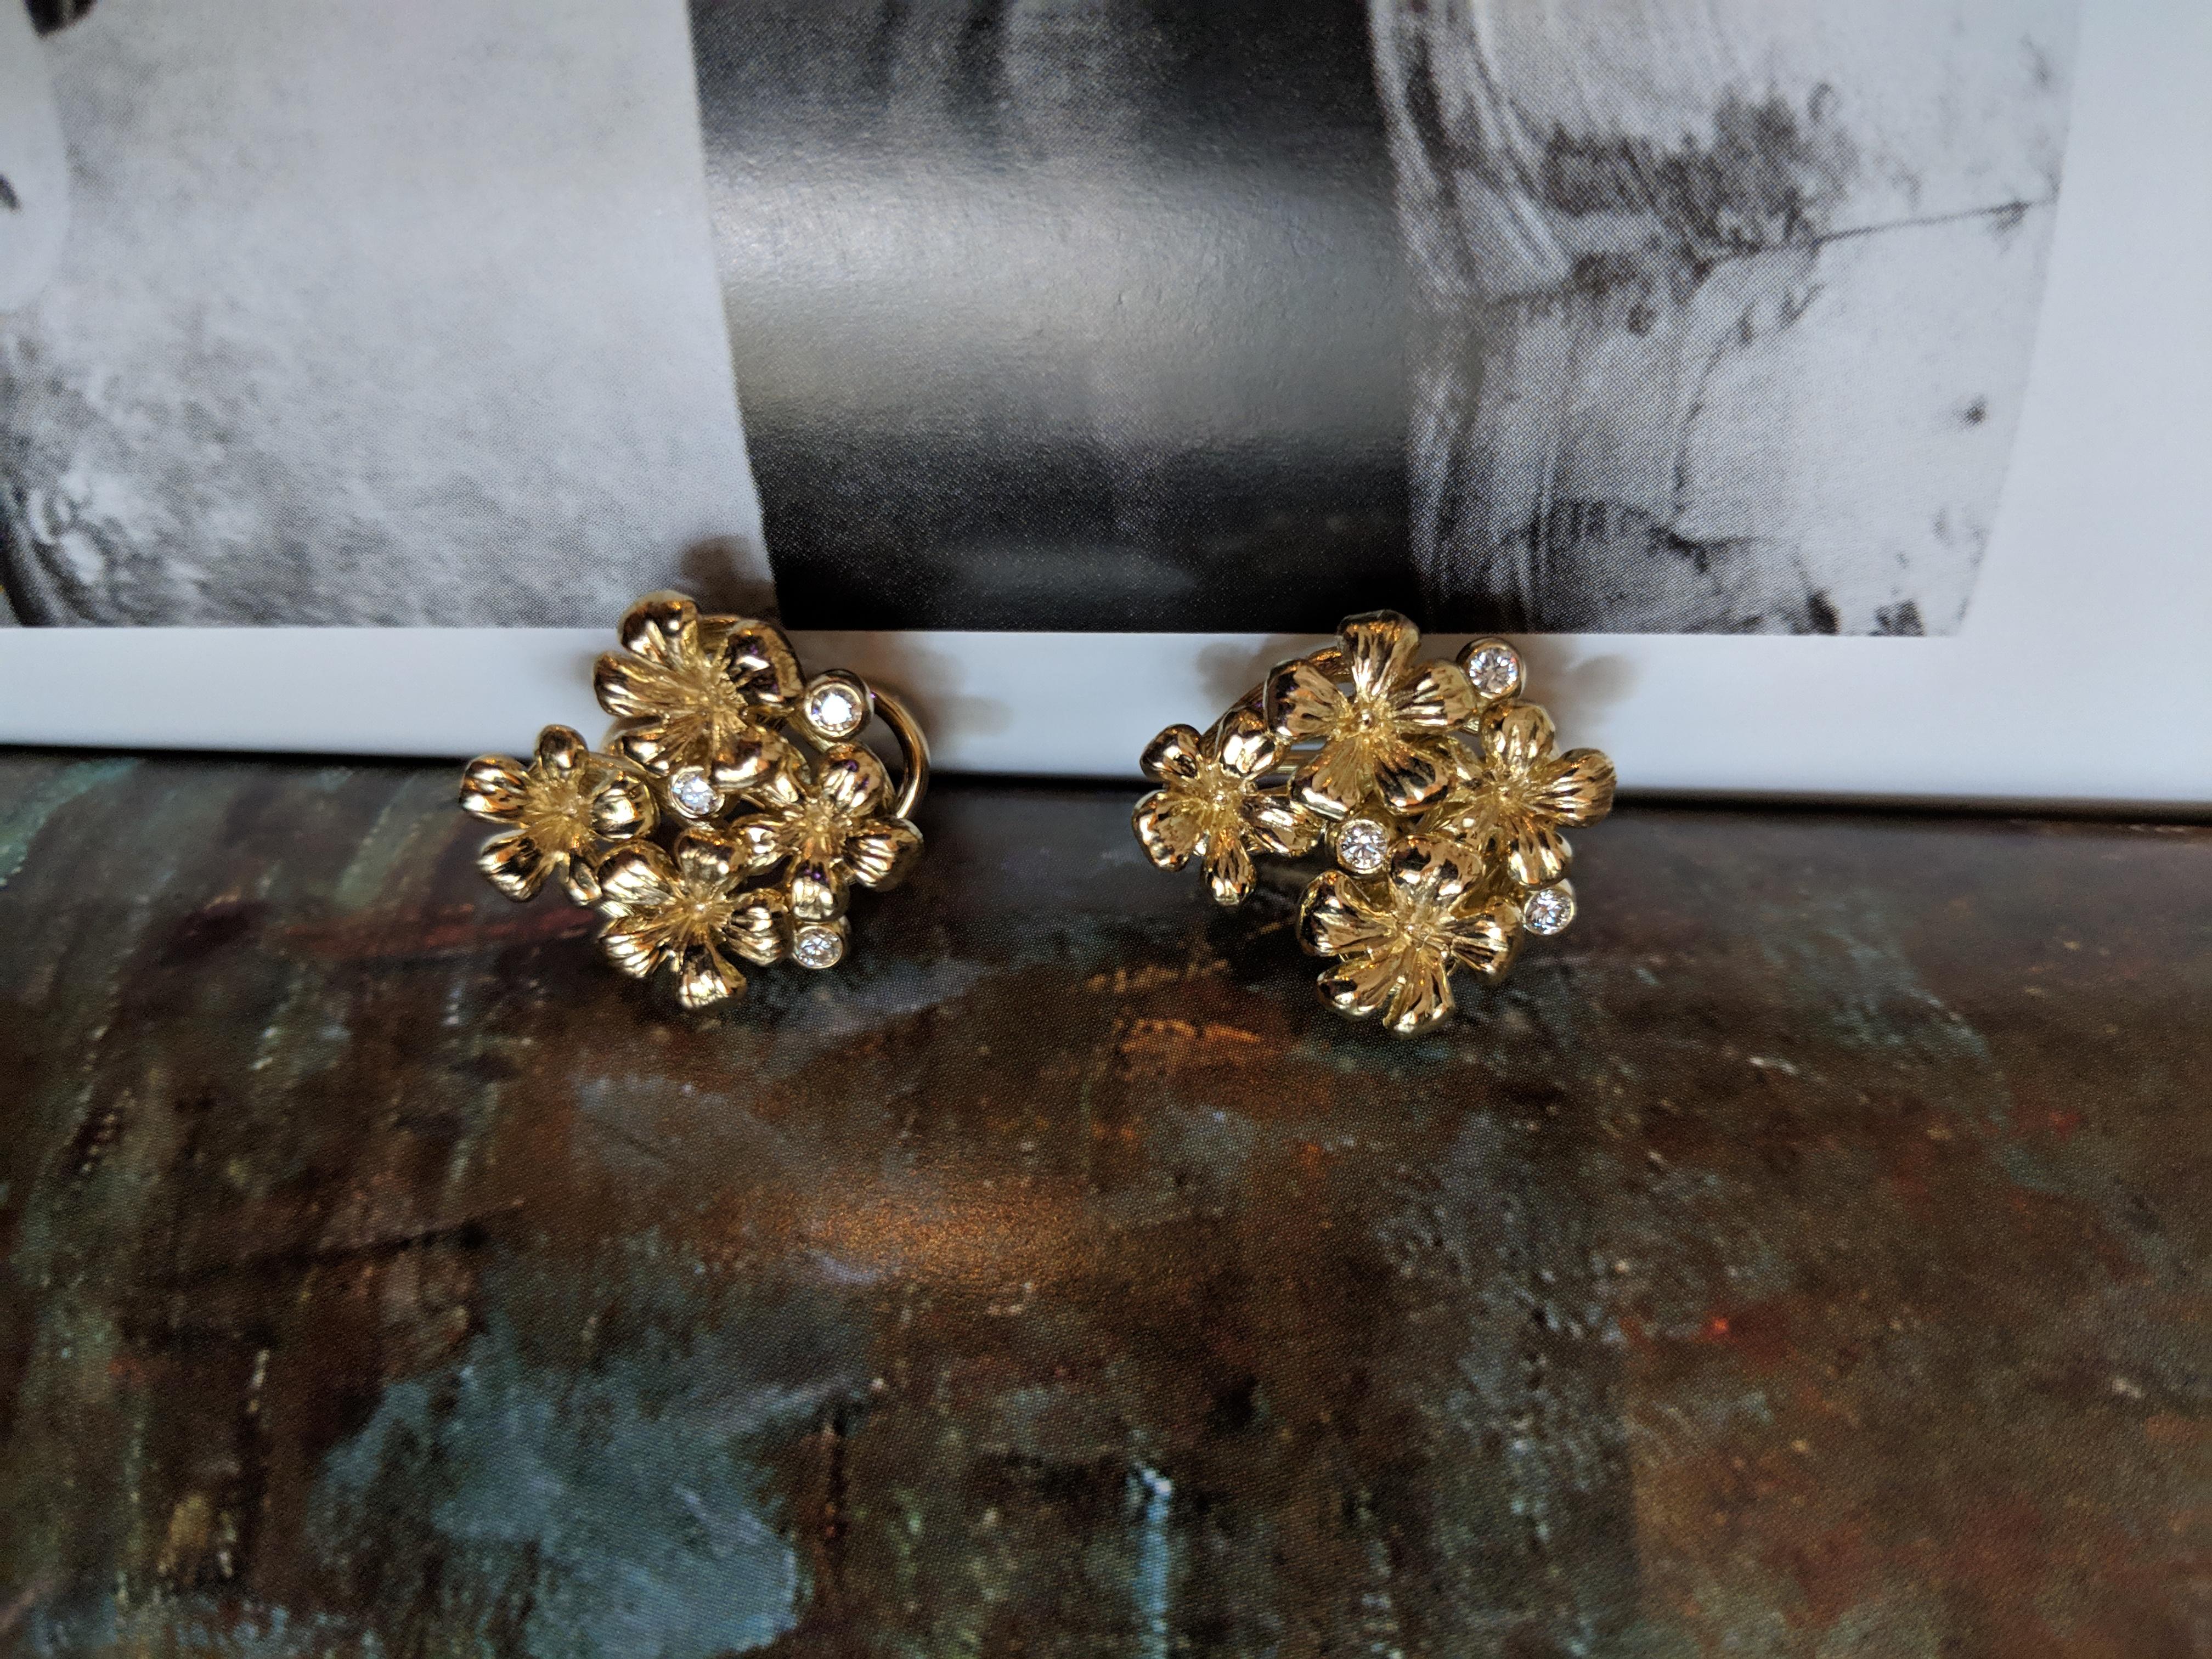 Modern Style Clip-on Earrings in Eightee Karat Yellow Gold with Natural Diamonds For Sale 9